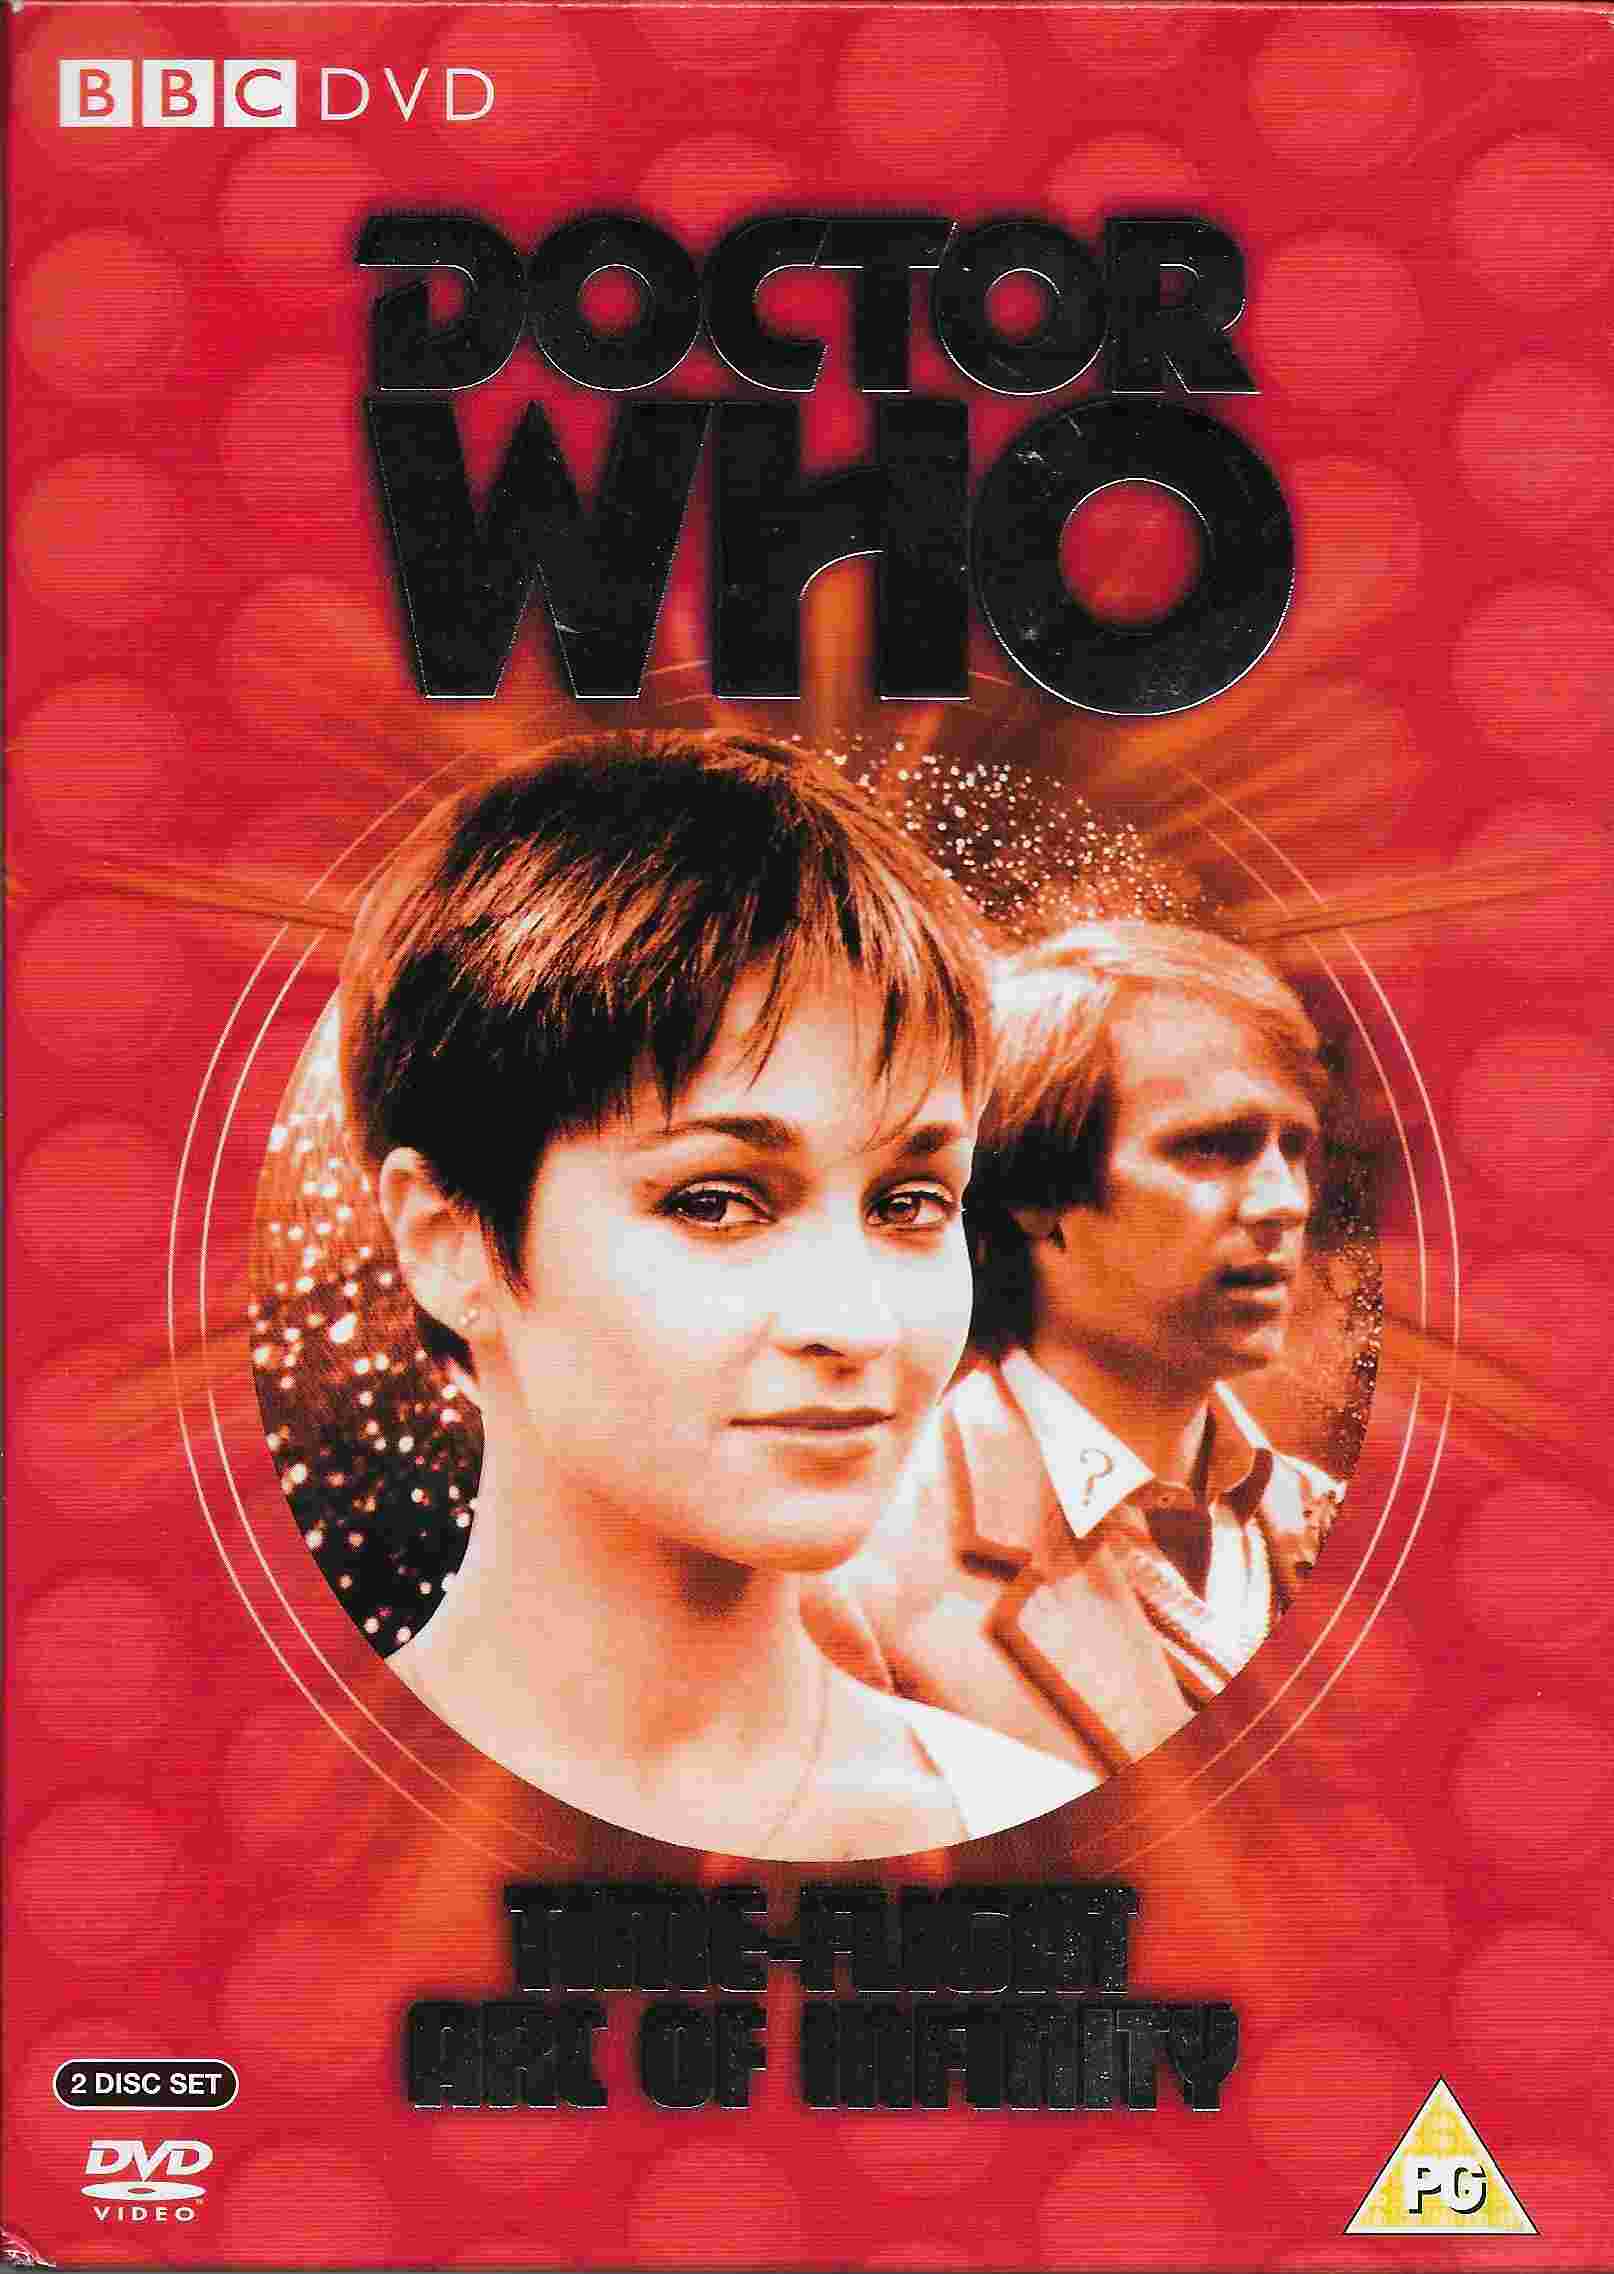 Picture of BBCDVD 2327 Doctor Who - Time-flight / Arc of Infinity by artist Peter Grimwade / Johnny Byrne from the BBC dvds - Records and Tapes library